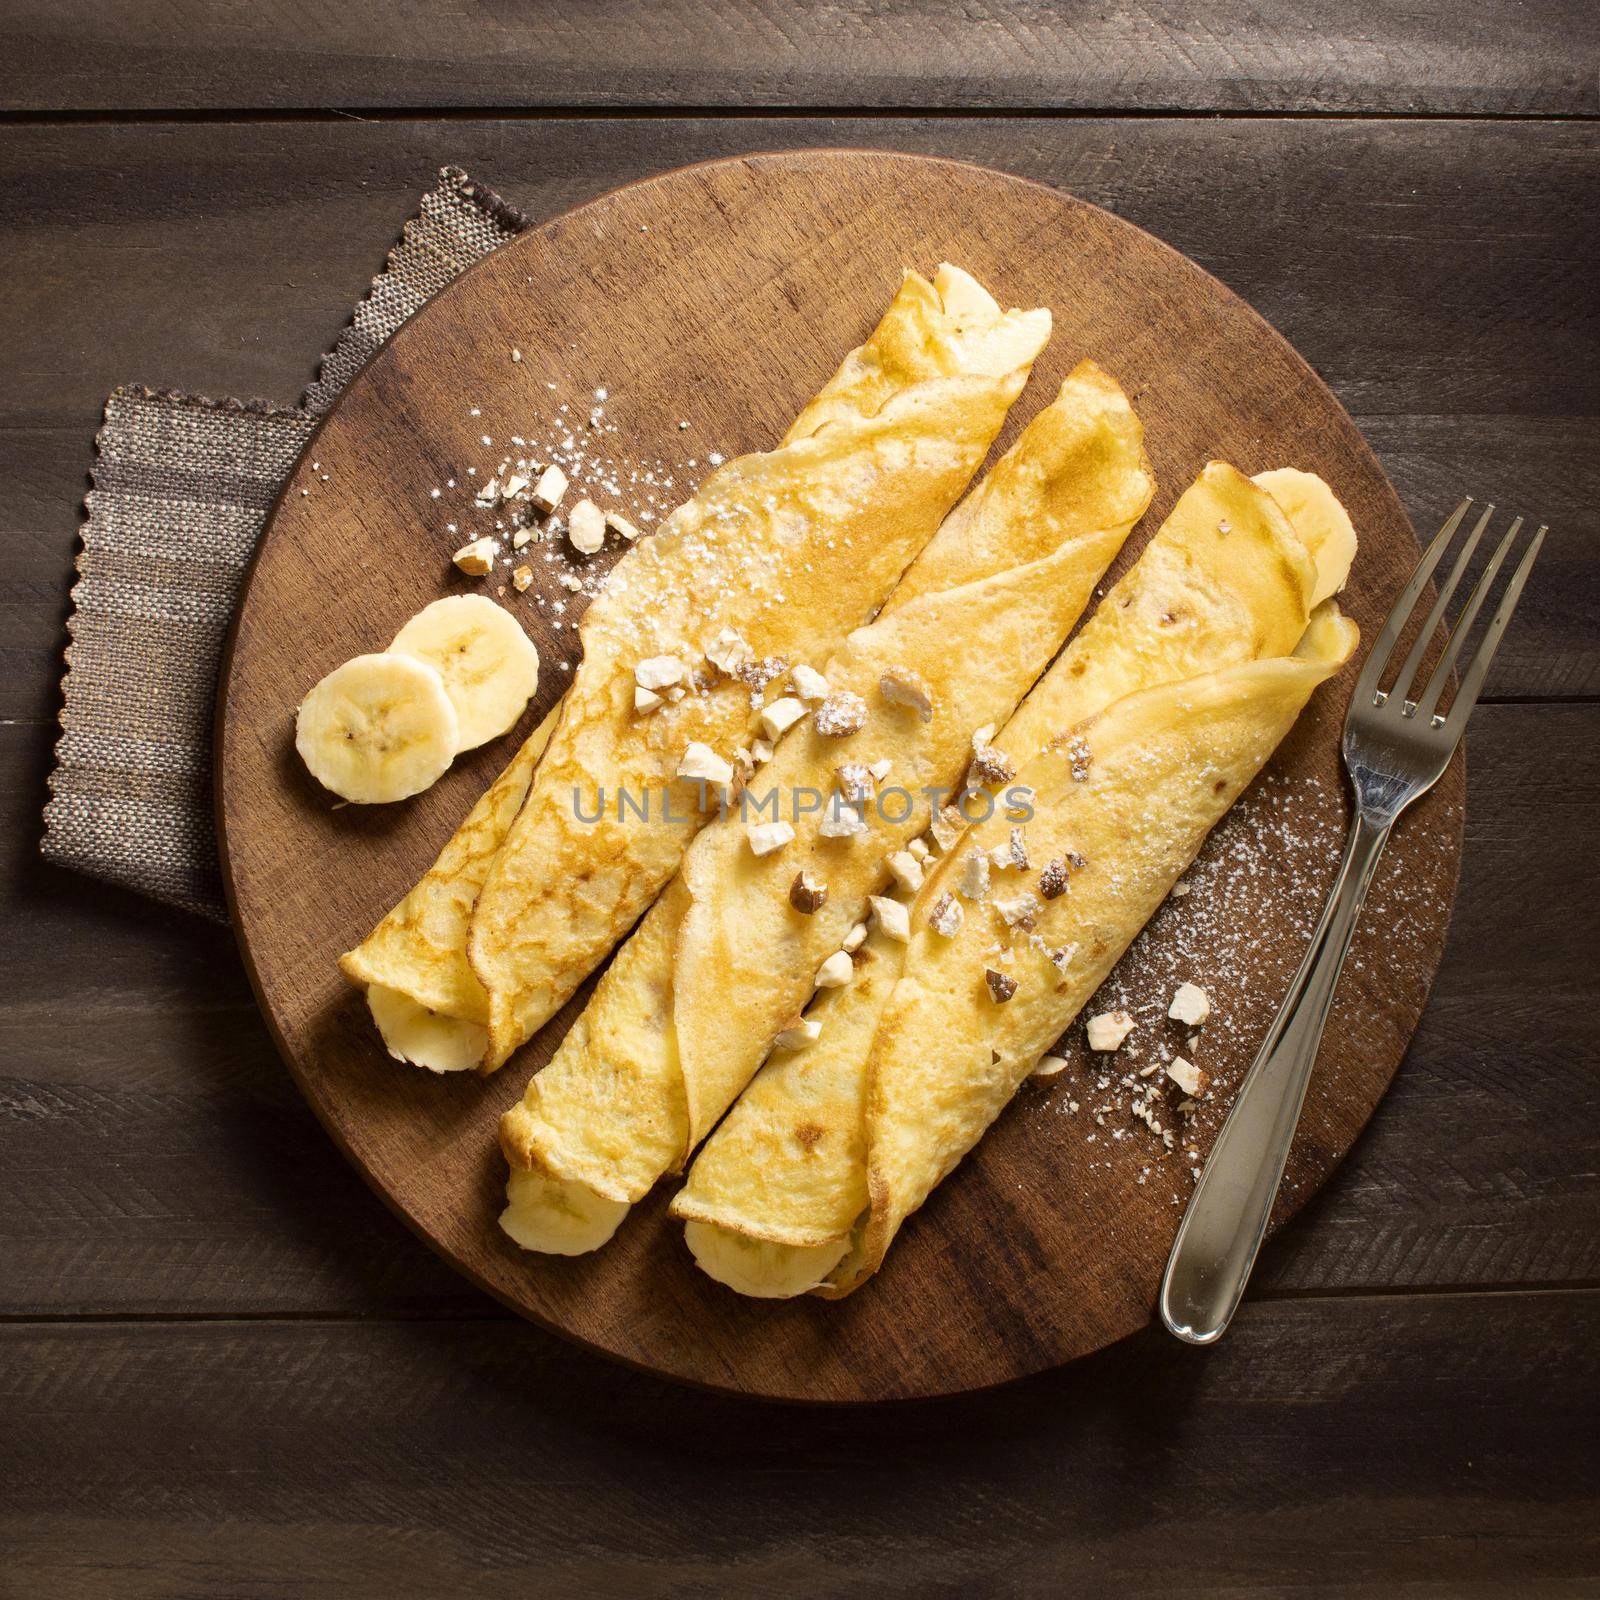 delicious winter crepe dessert with bananas. High quality beautiful photo concept by Zahard